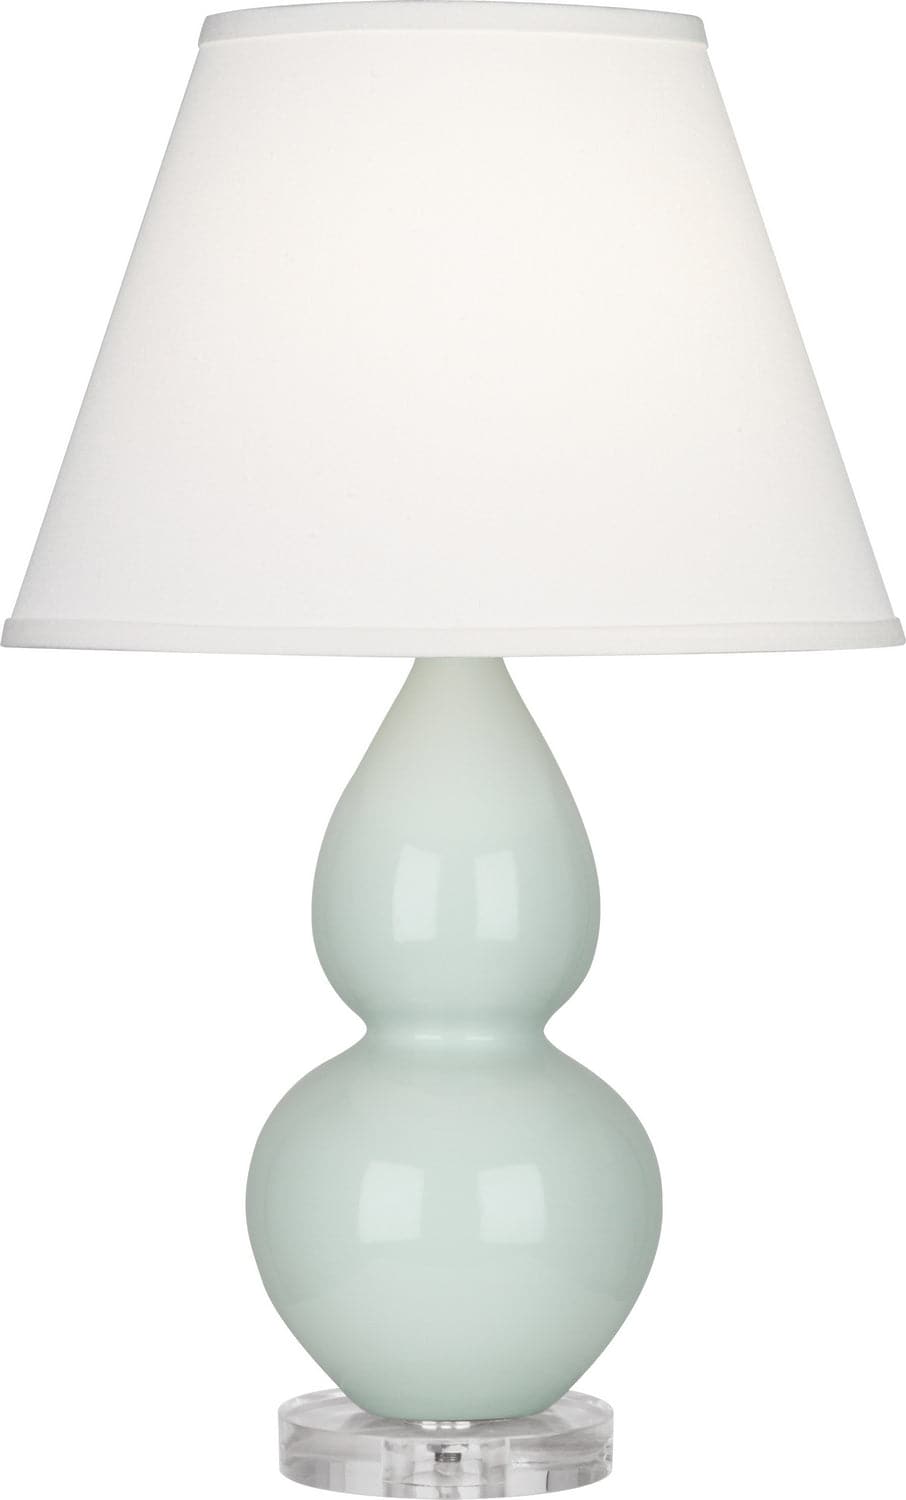 Robert Abbey - A788X - One Light Accent Lamp - Small Double Gourd - Celadon Glazed w/Lucite Base